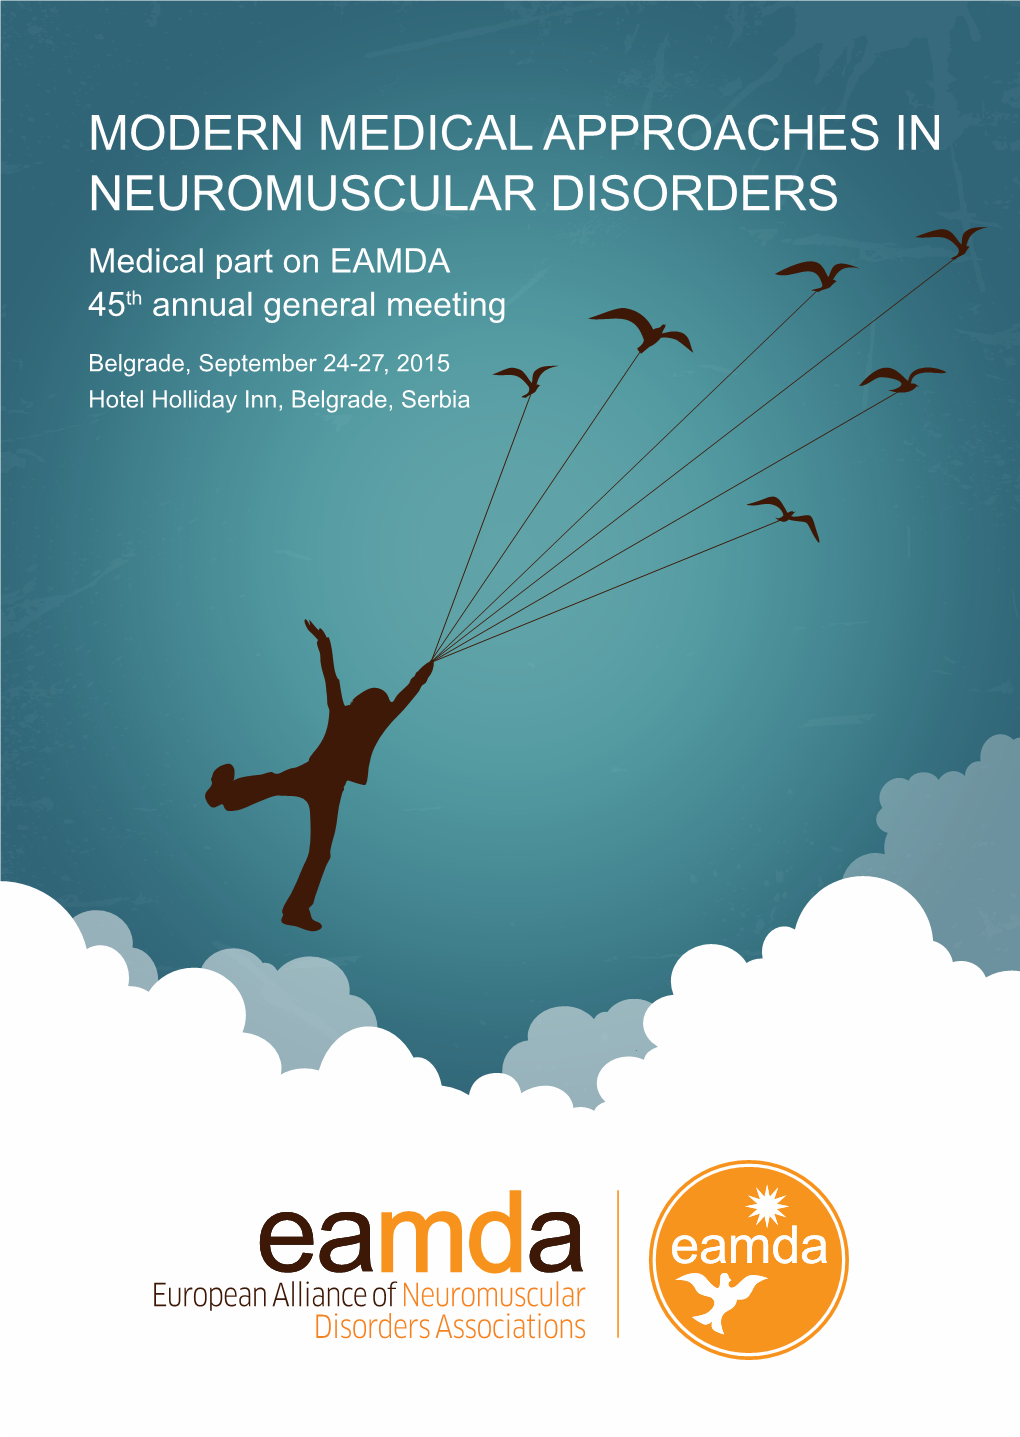 MODERN MEDICAL APPROACHES in NEUROMUSCULAR DISORDERS Medical Part on EAMDA 45Th Annual General Meeting